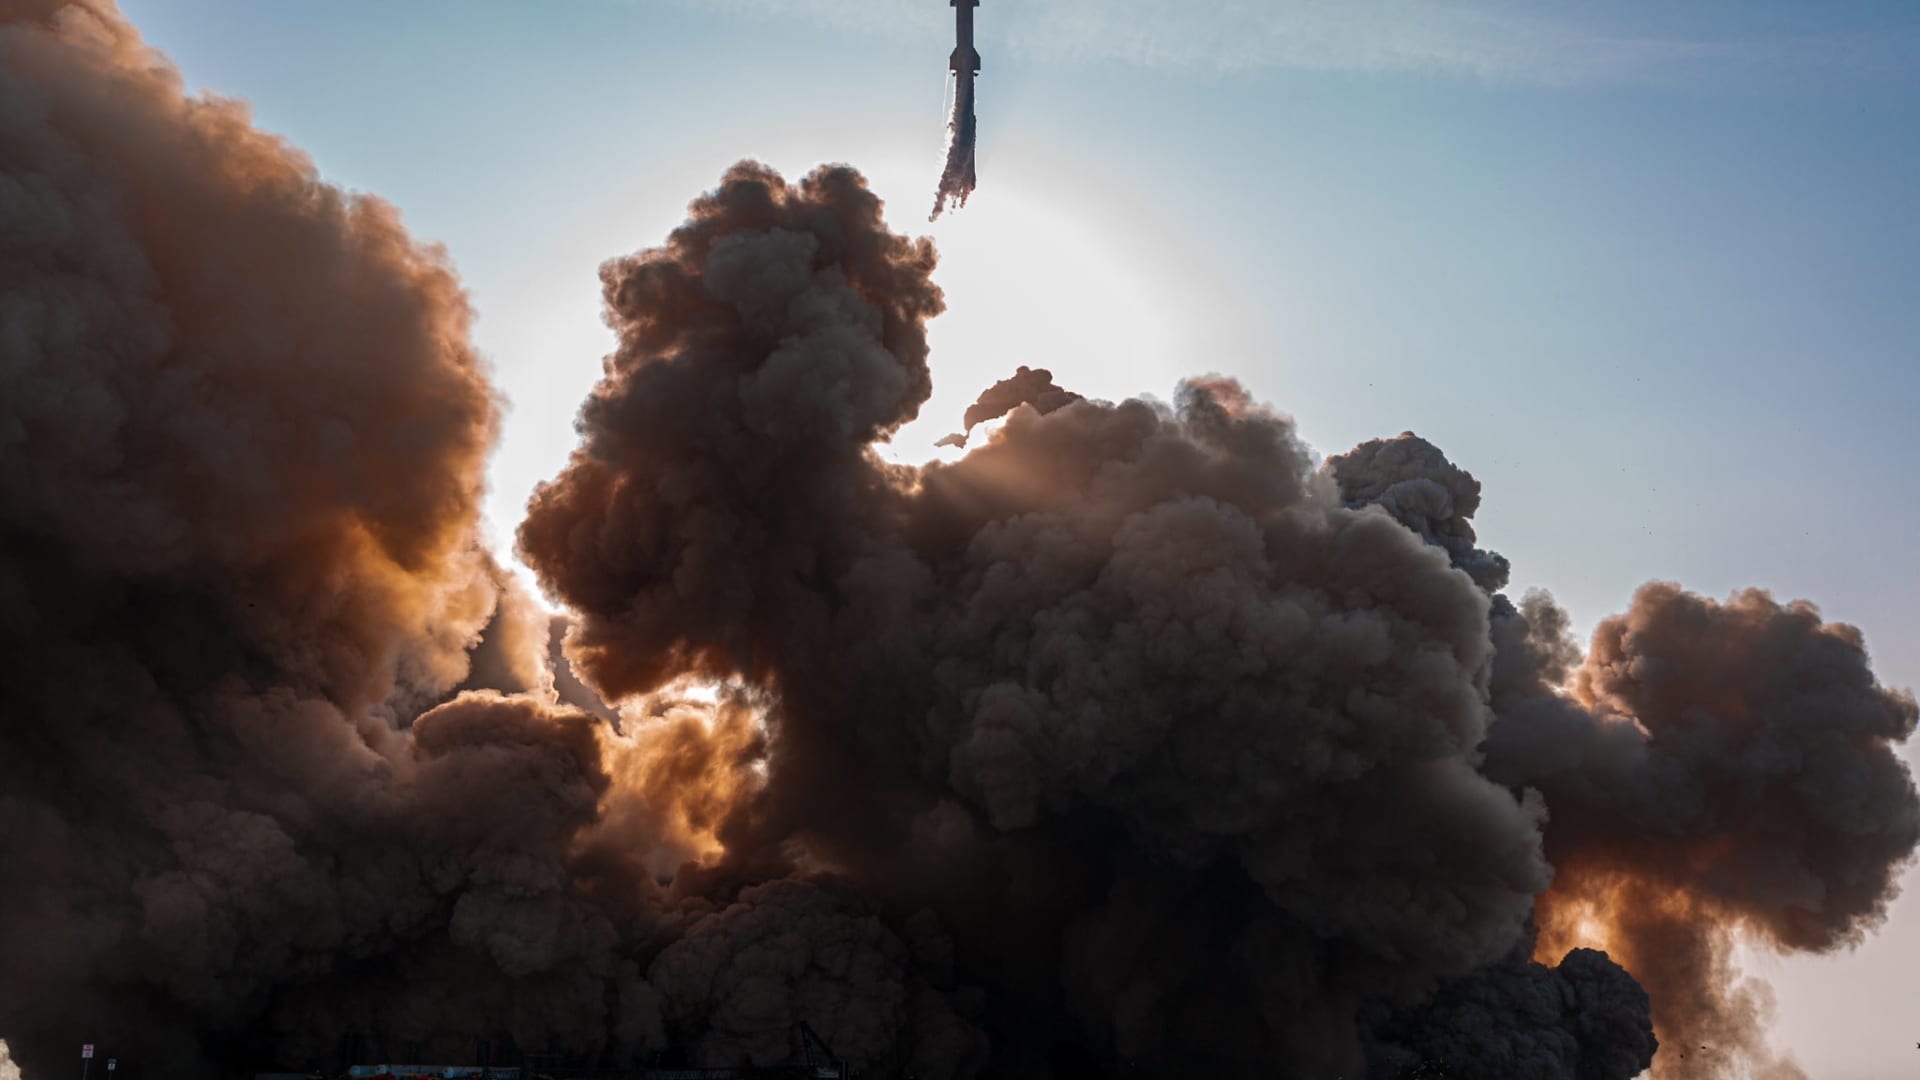 A dust cloud grows underneath Starship as the rocket launches on its Super Heavy booster from Texas on April 20, 2023.